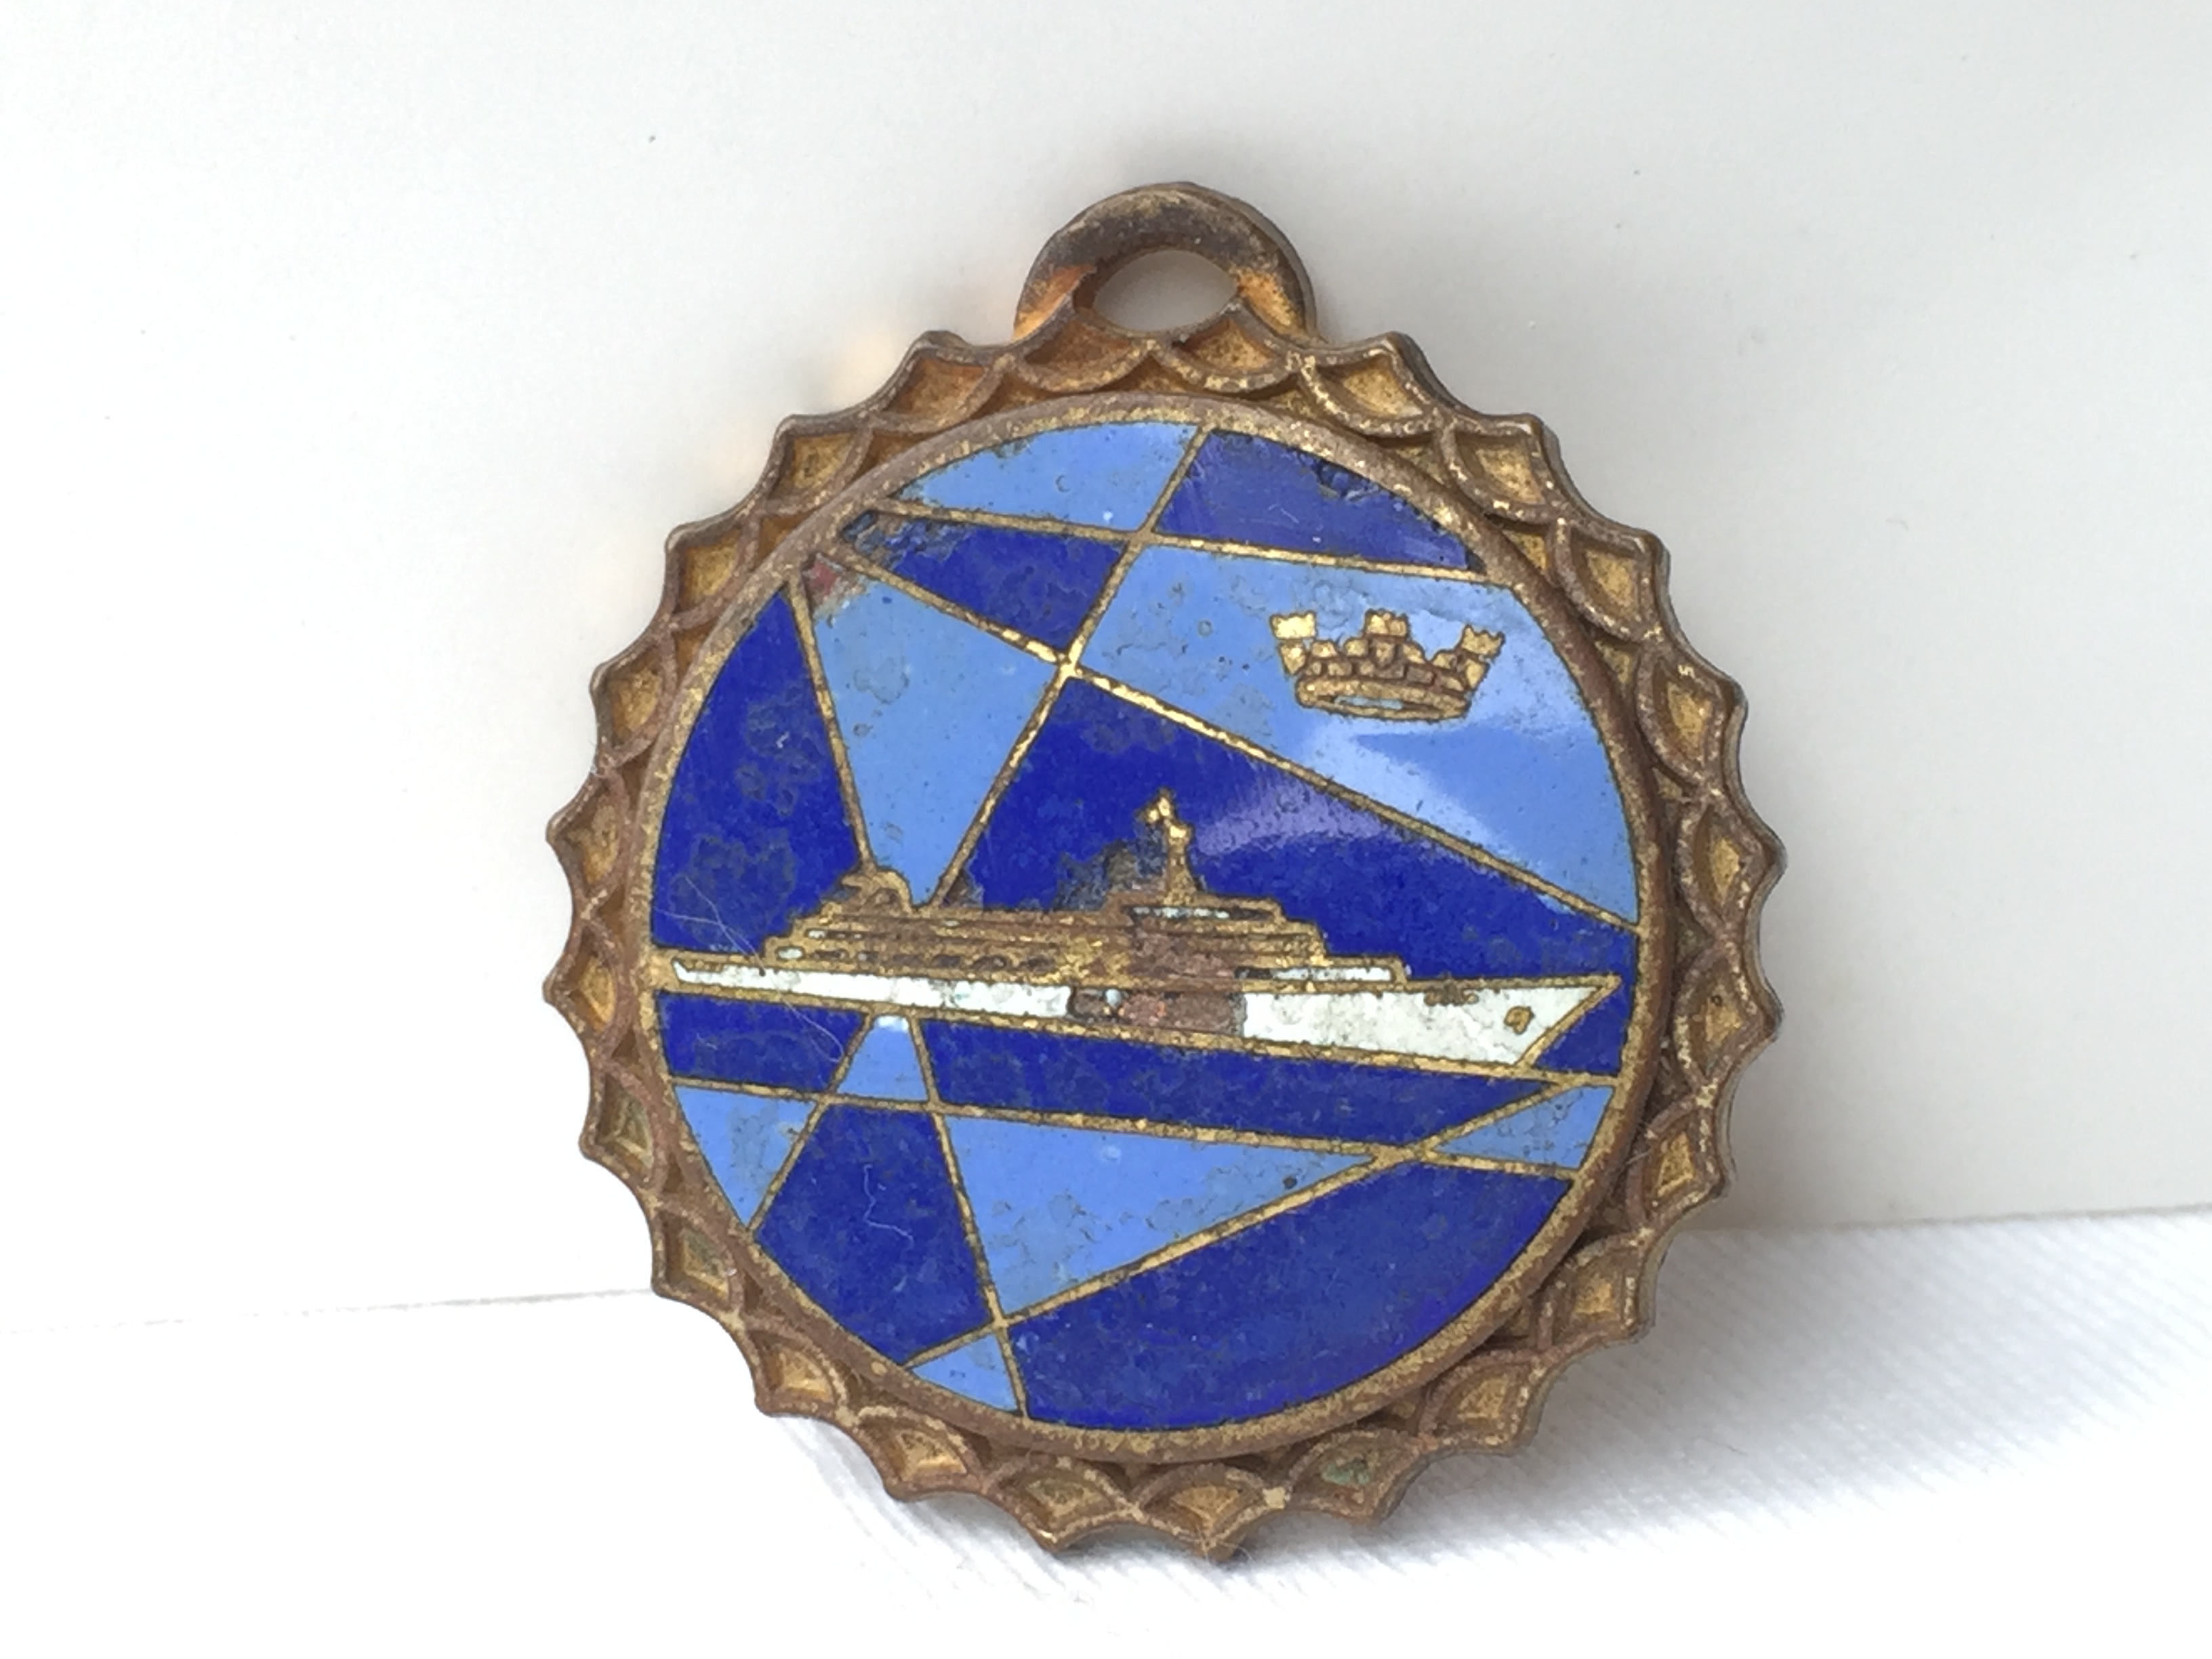 LAPEL PIN BADGE FROM THE HOME LINE VESSEL THE SS OCEANIC